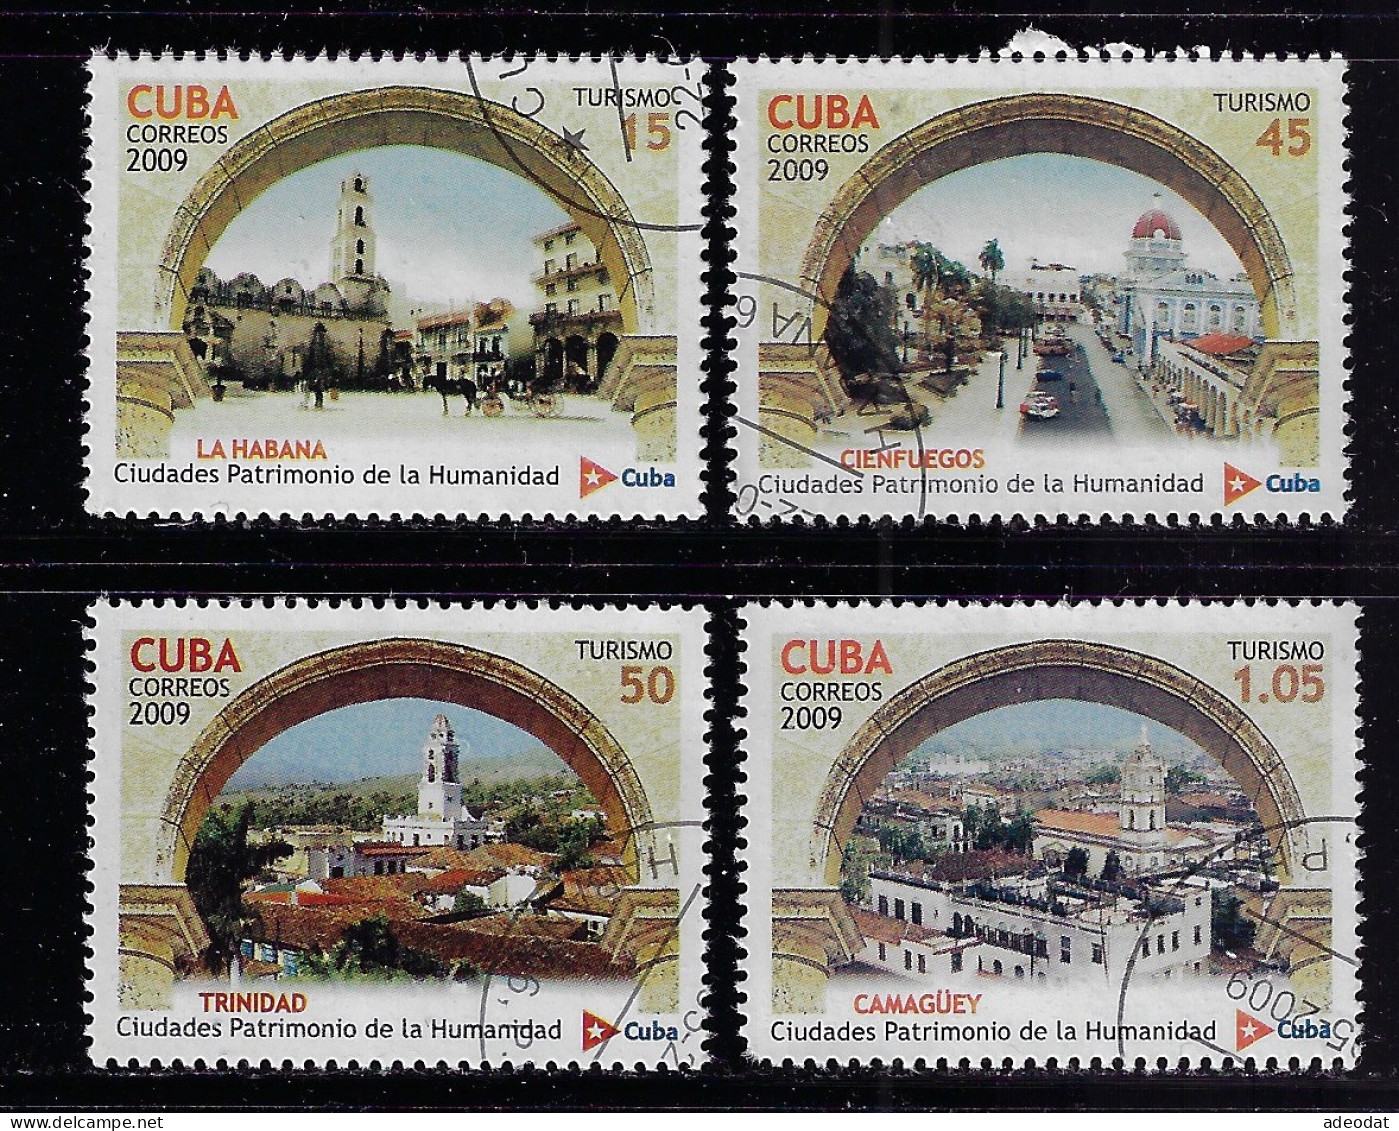 CUBA 2009 STAMPWORLD 5283-5286 CANCELLED - Used Stamps